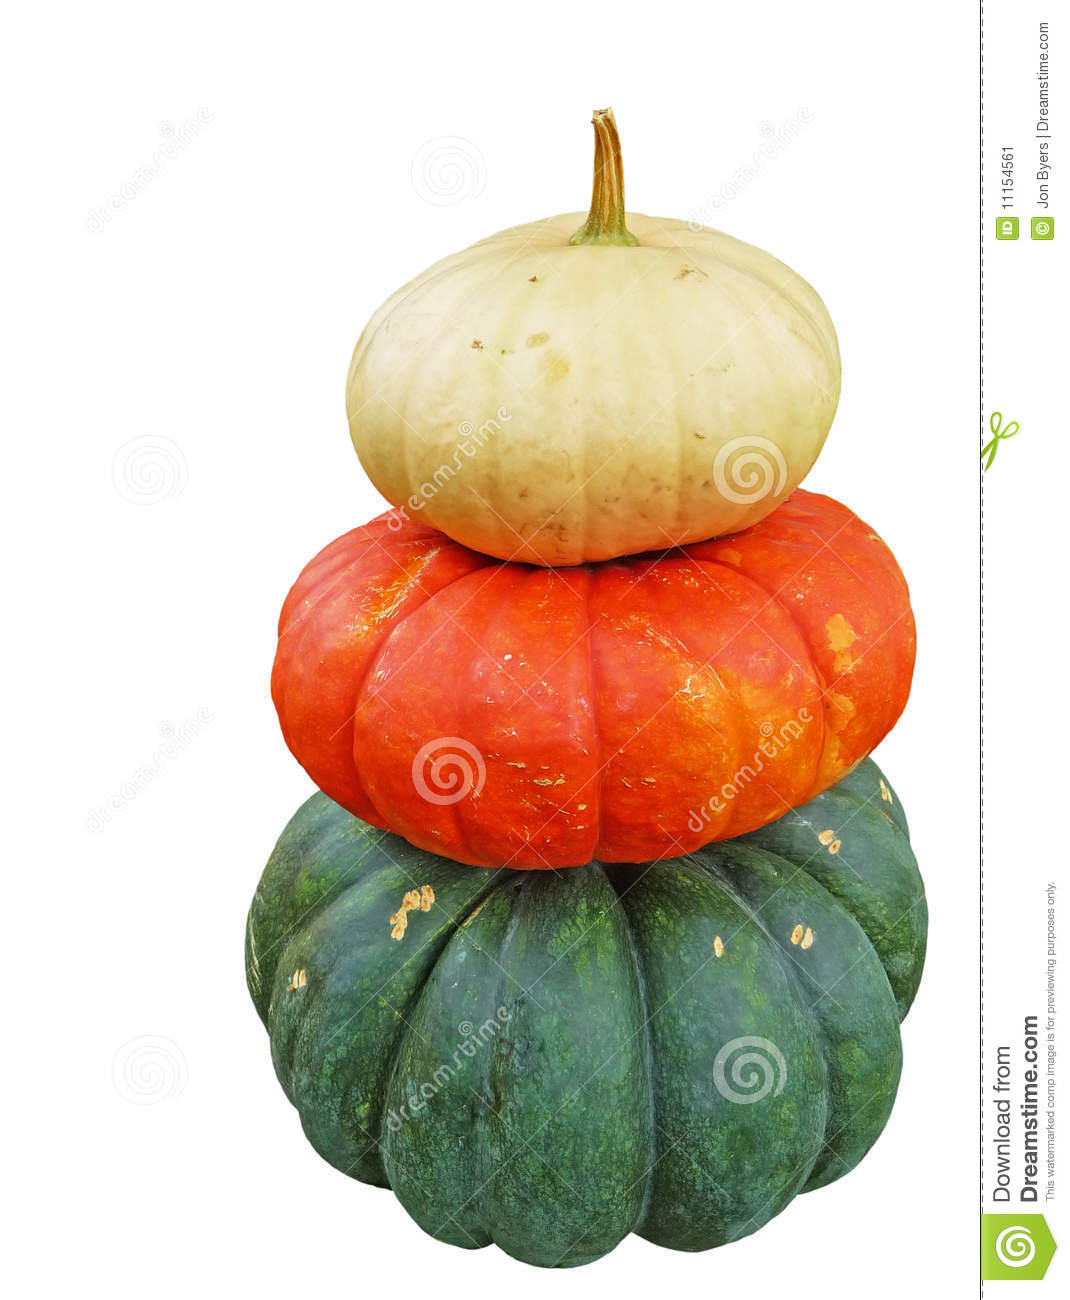 Three Stacked Pumpkins Isolated On White Stock Image   Image  11154561